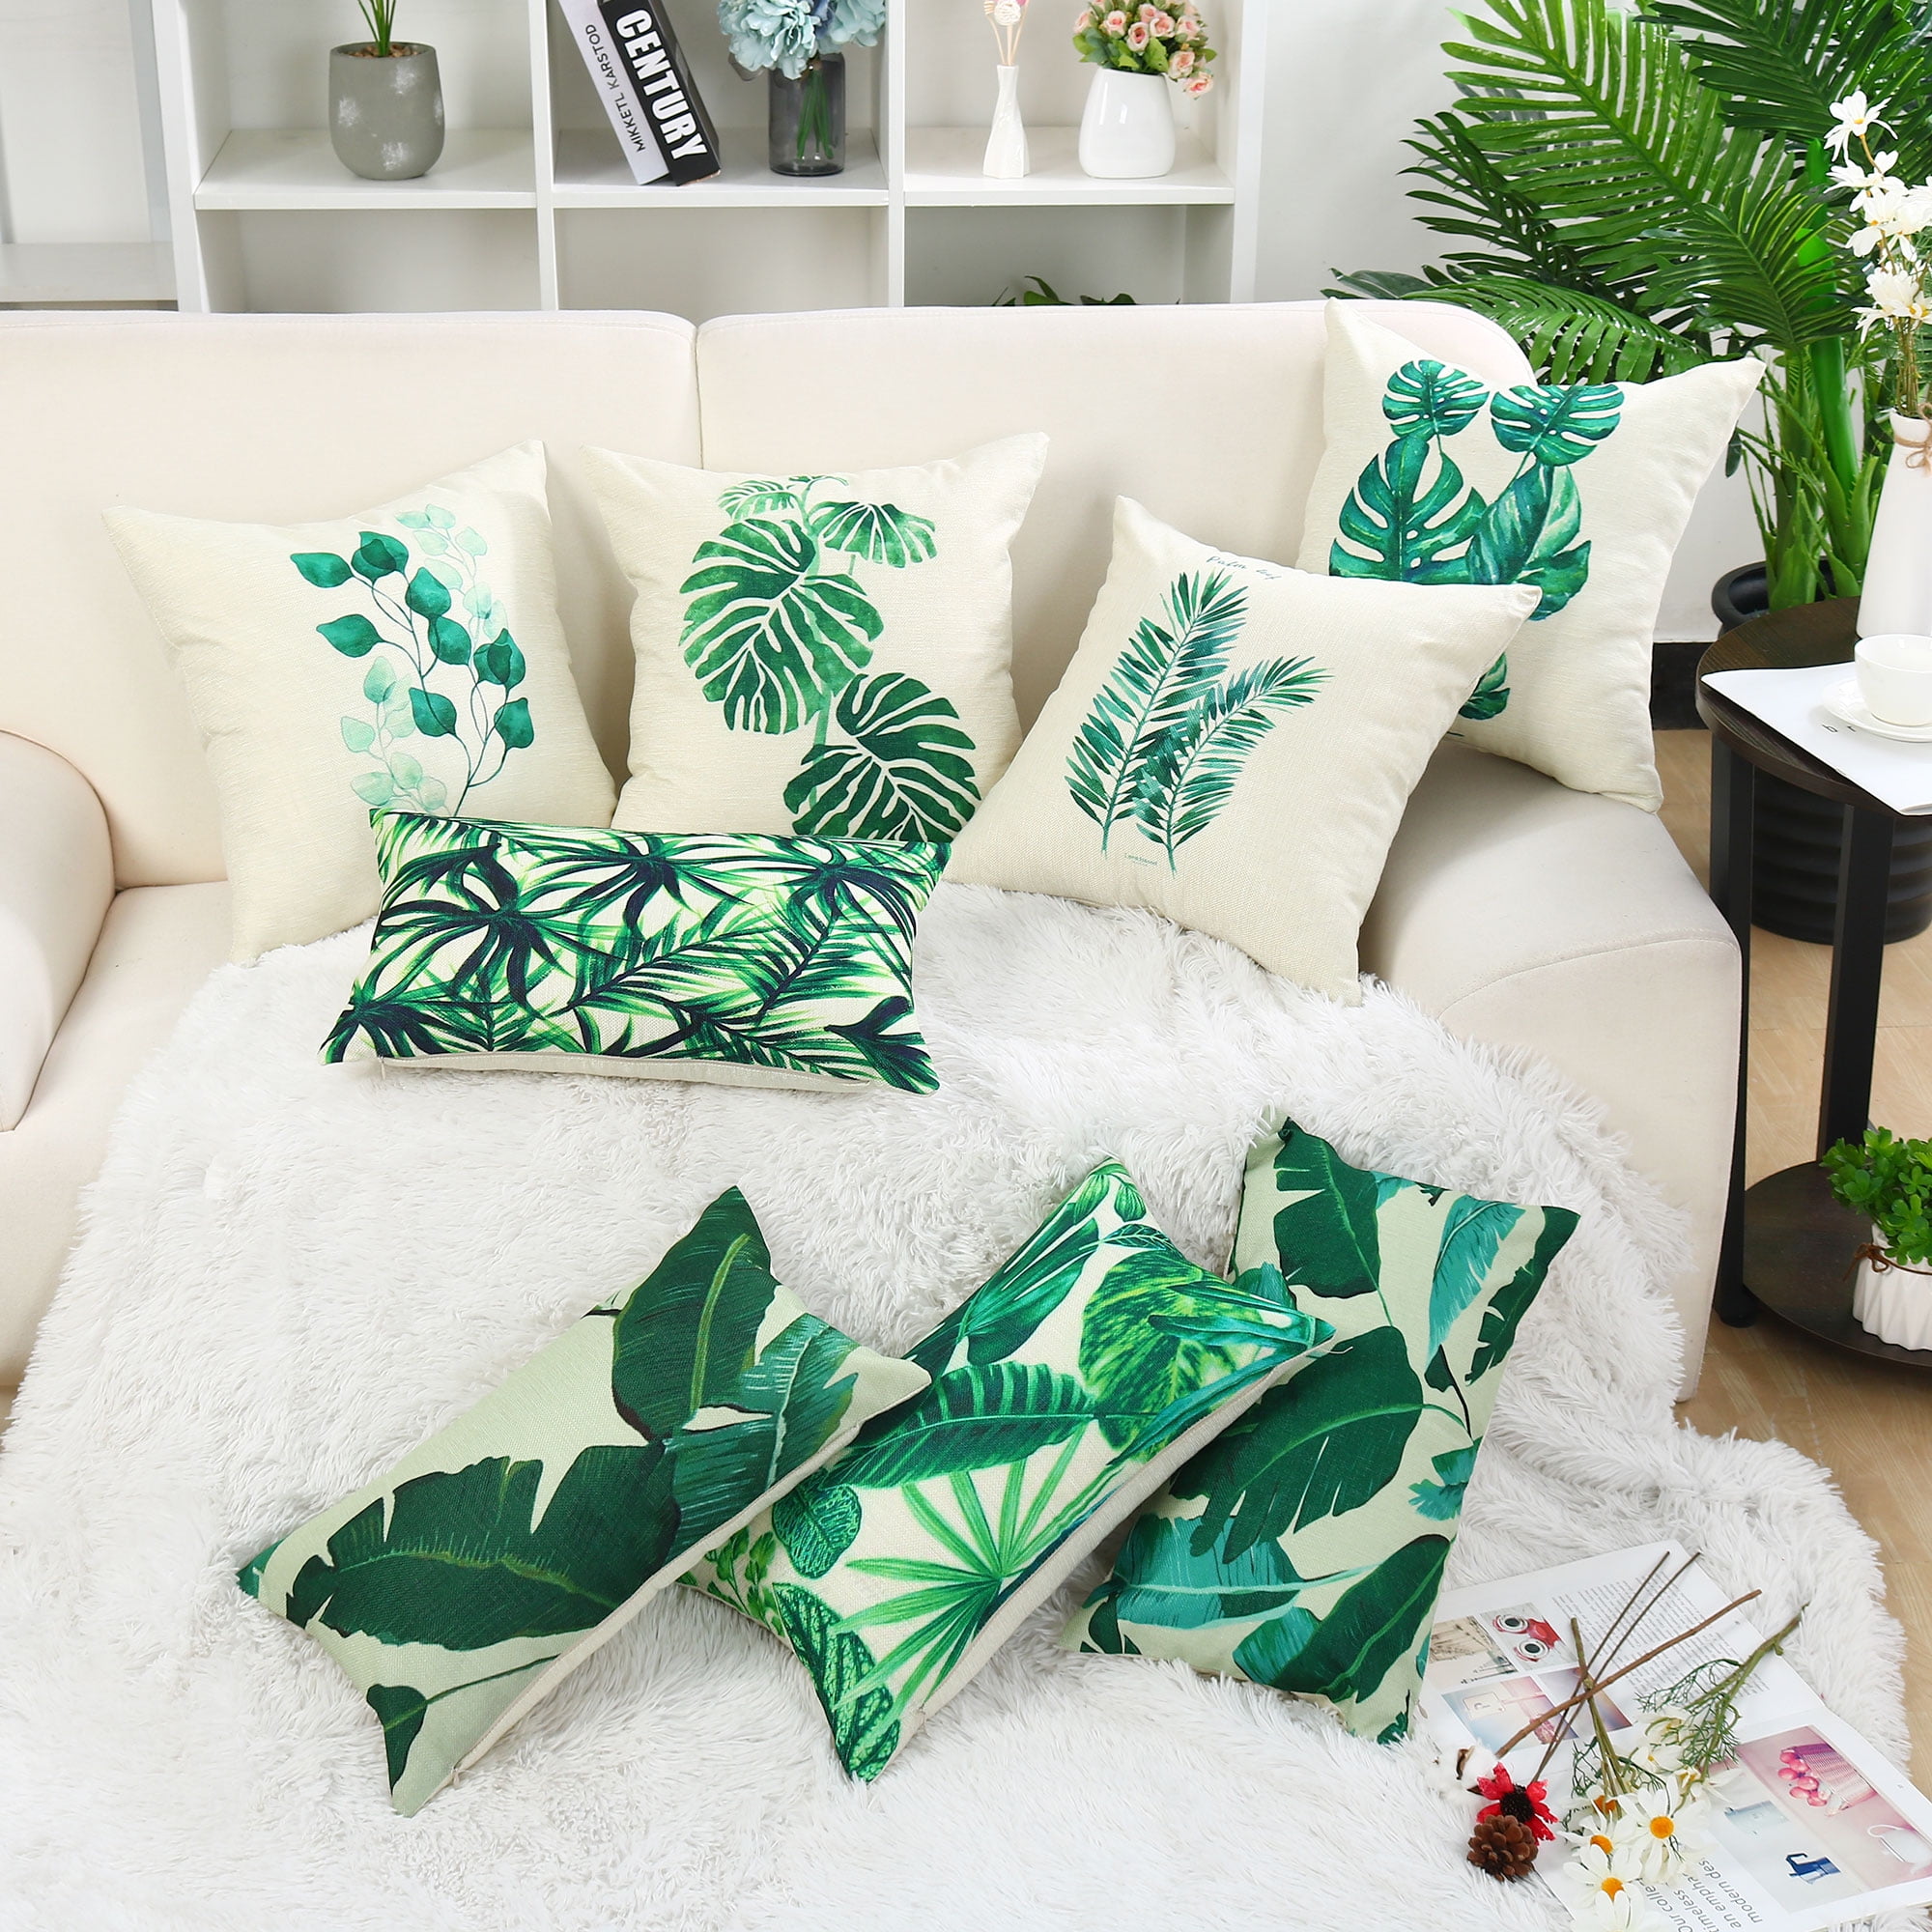 Details about   Cushion Cover Home Cute Decorative Throw Pillow Case x 1 